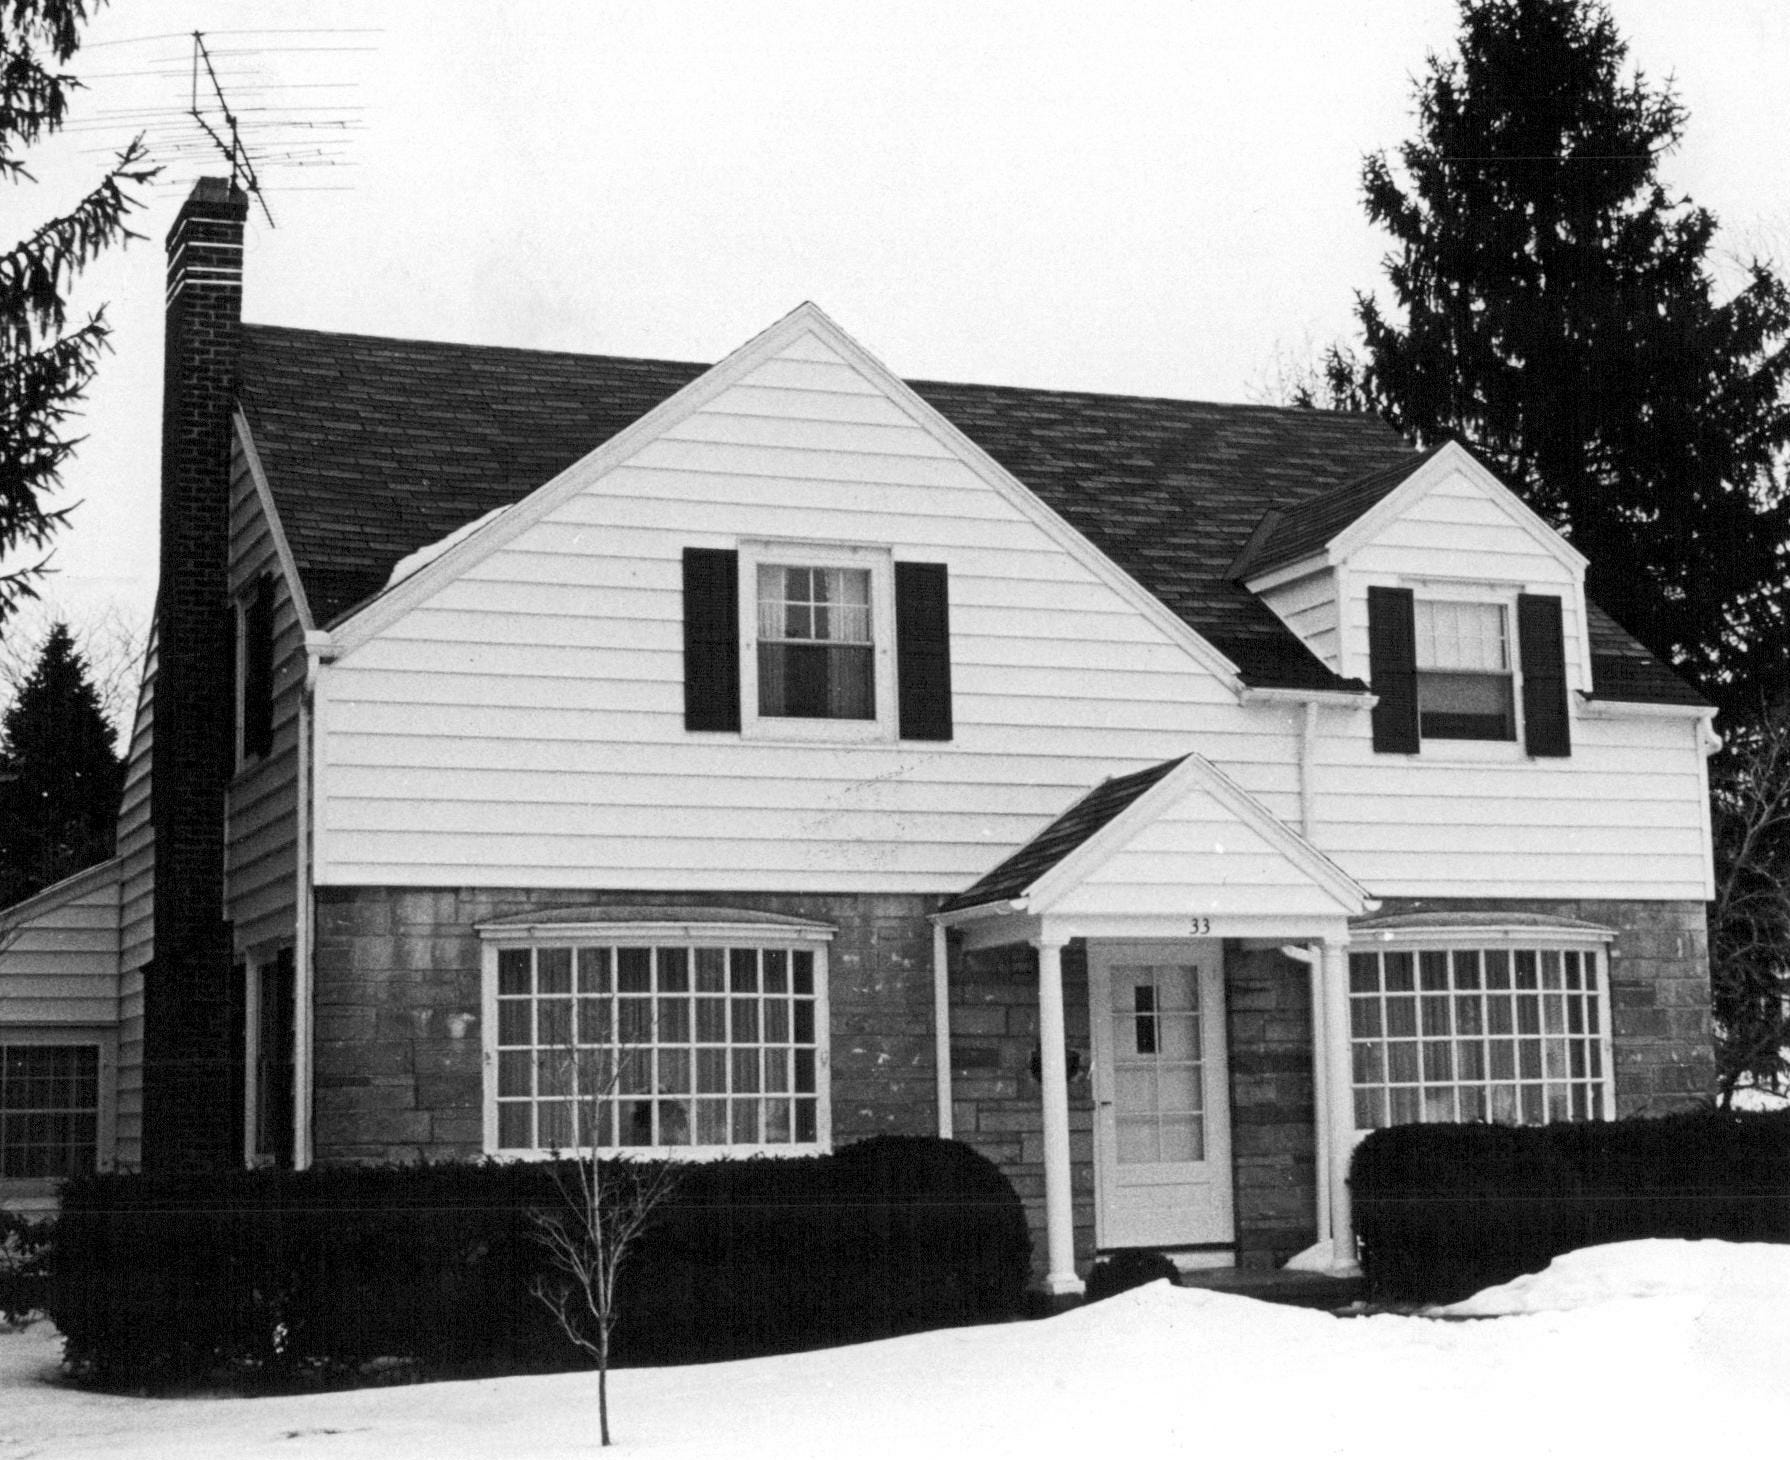 33 Del Rio Drive, Brighton, then home of James and Cathleen Krauseneck at the time of her murder